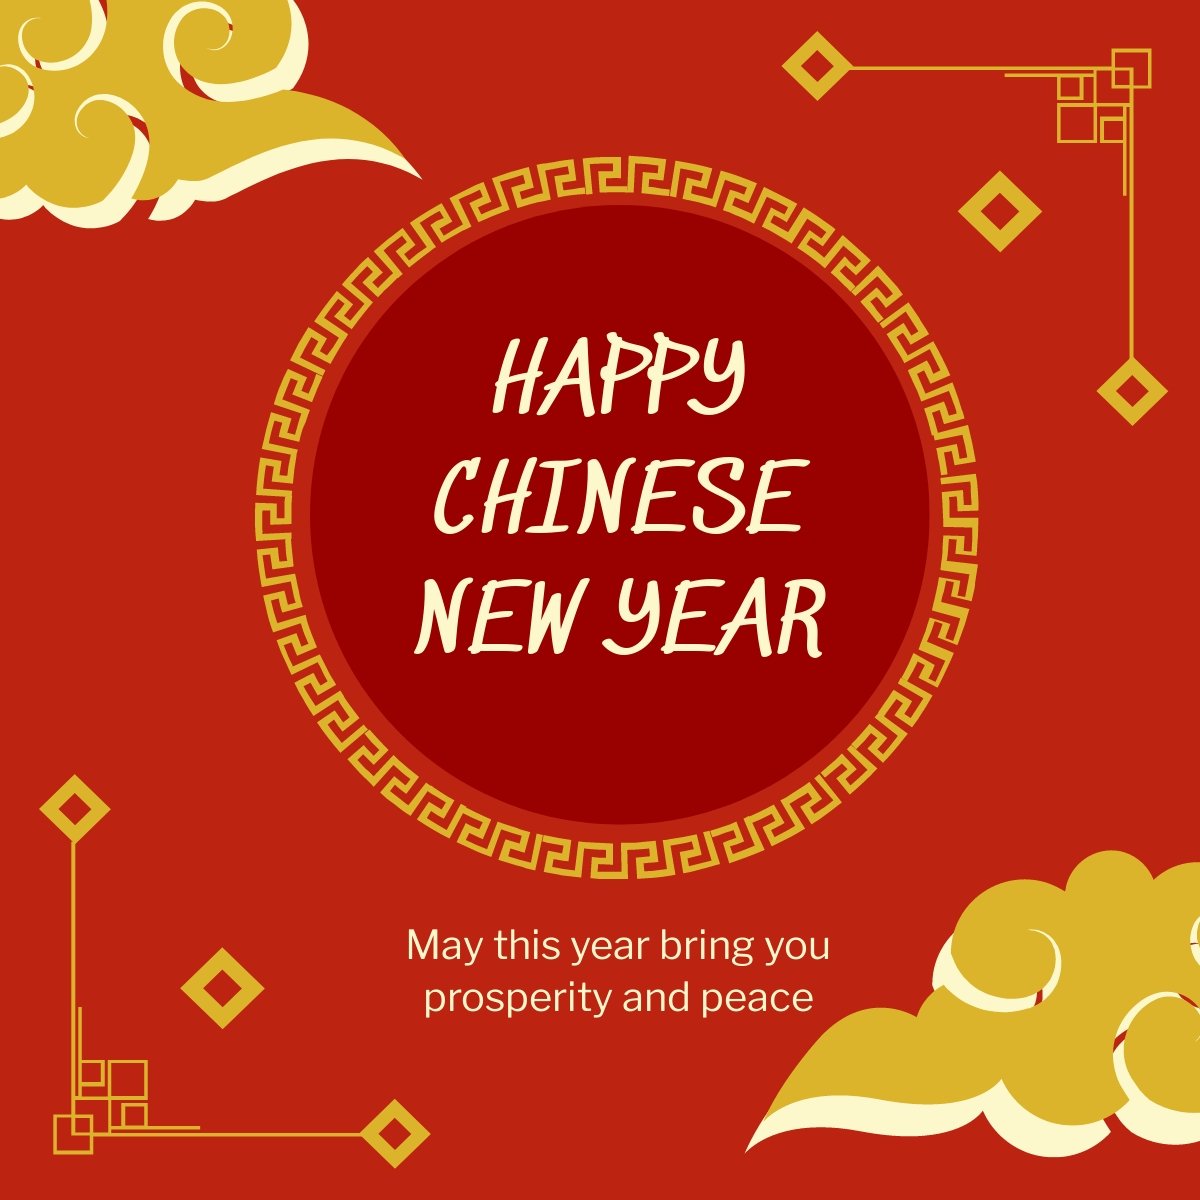 Vintage Chinese New Year Linkedin Post Template